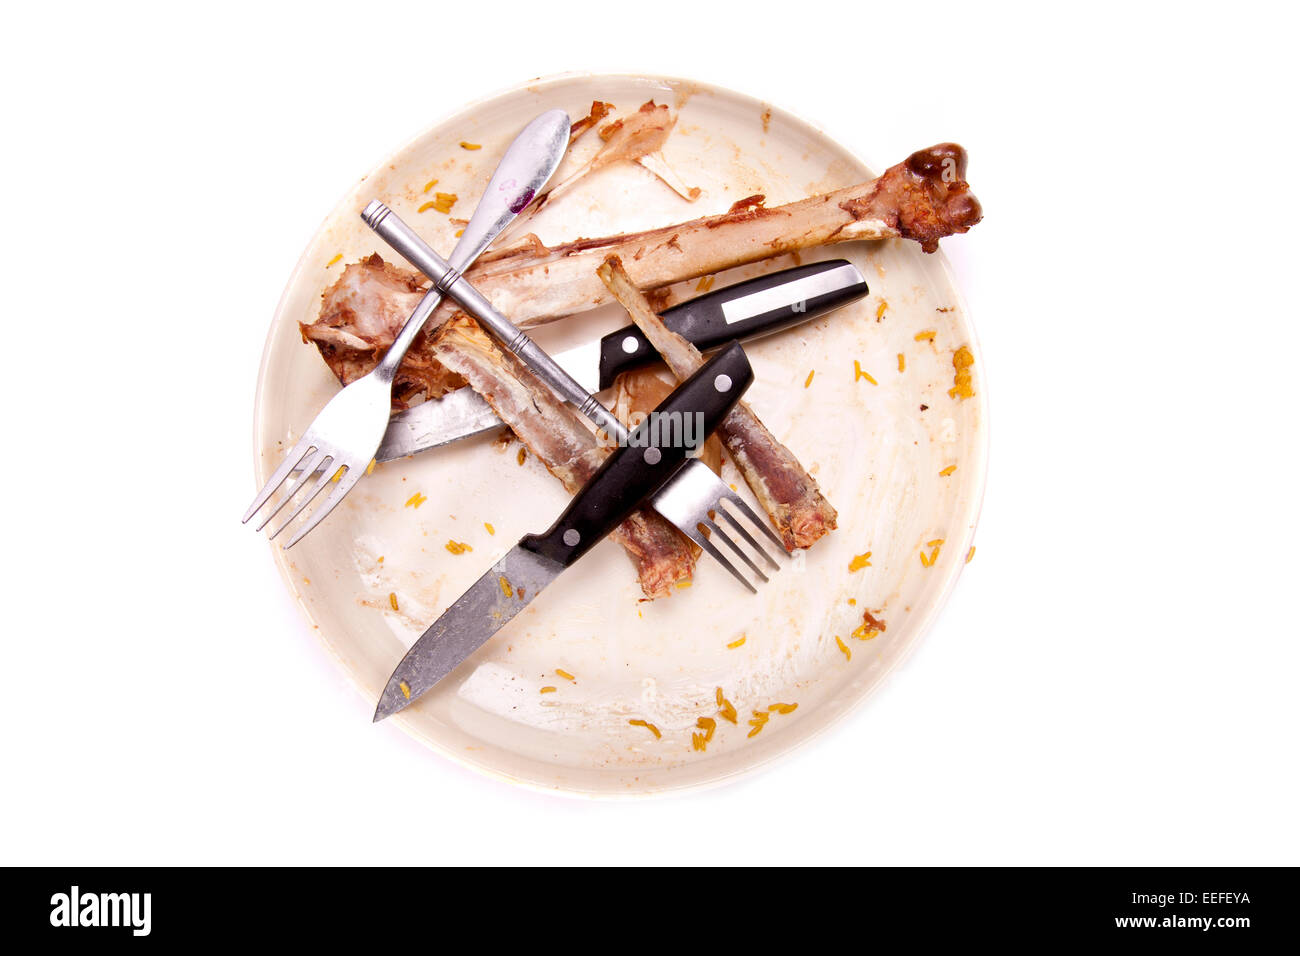 A stack of dirty plates, forks, knifes and a glass that needs washing-up. Dirty dishes. Stock Photo